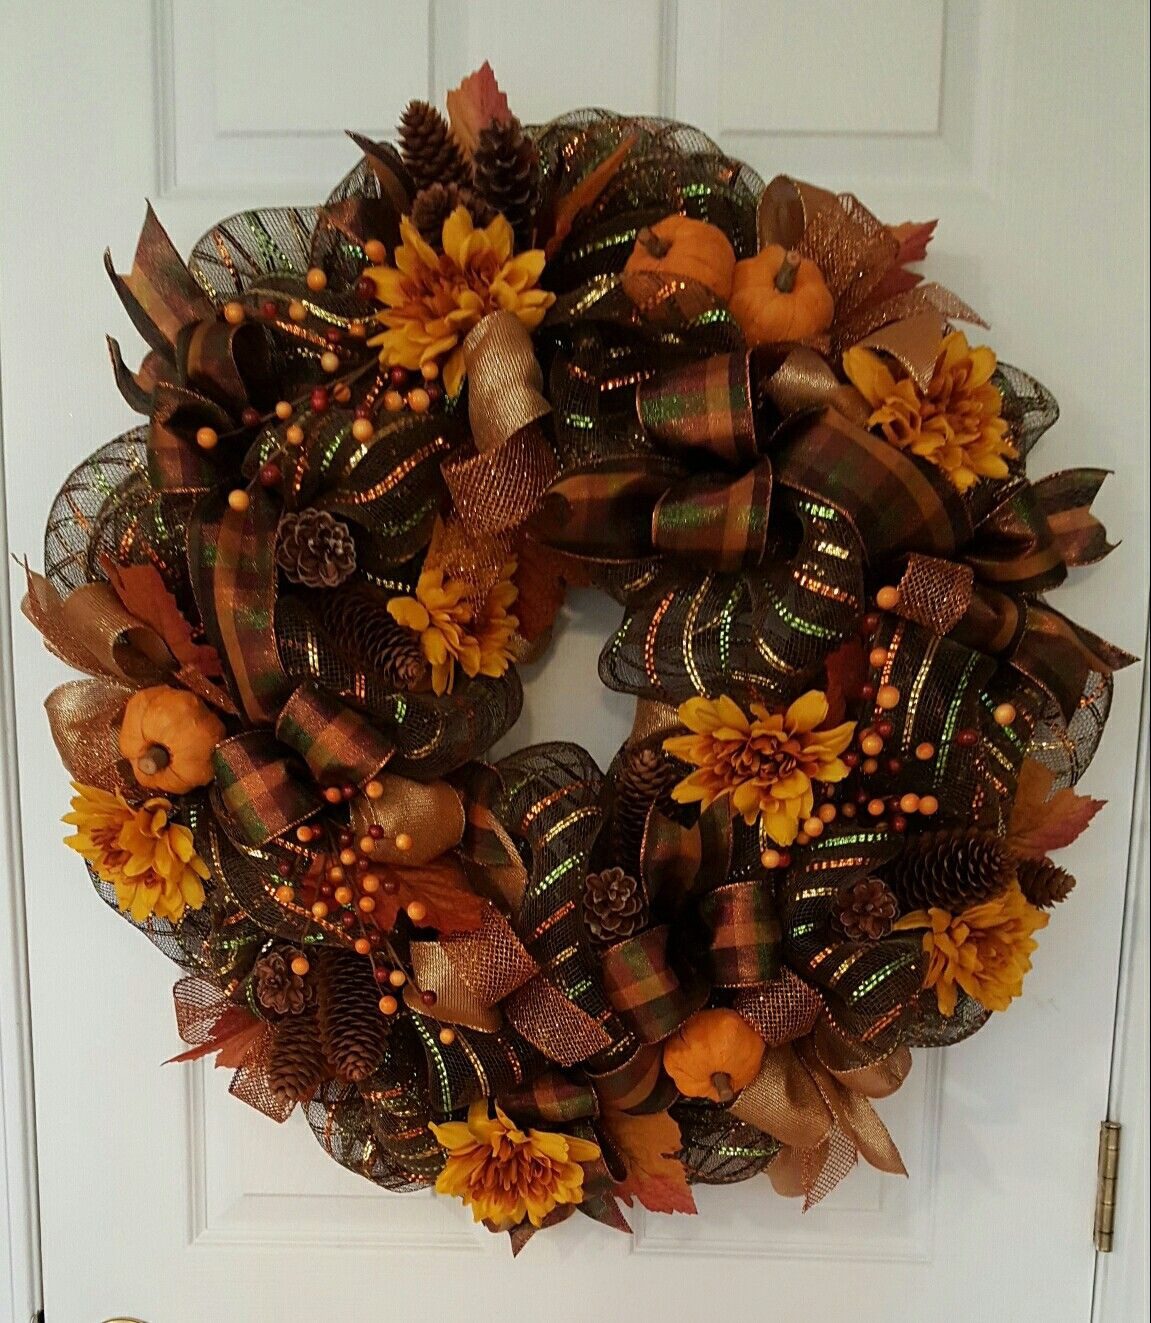 Diy Fall Deco Mesh Wreaths
 Fall deco mesh wreath with pumpkins flowers berries and